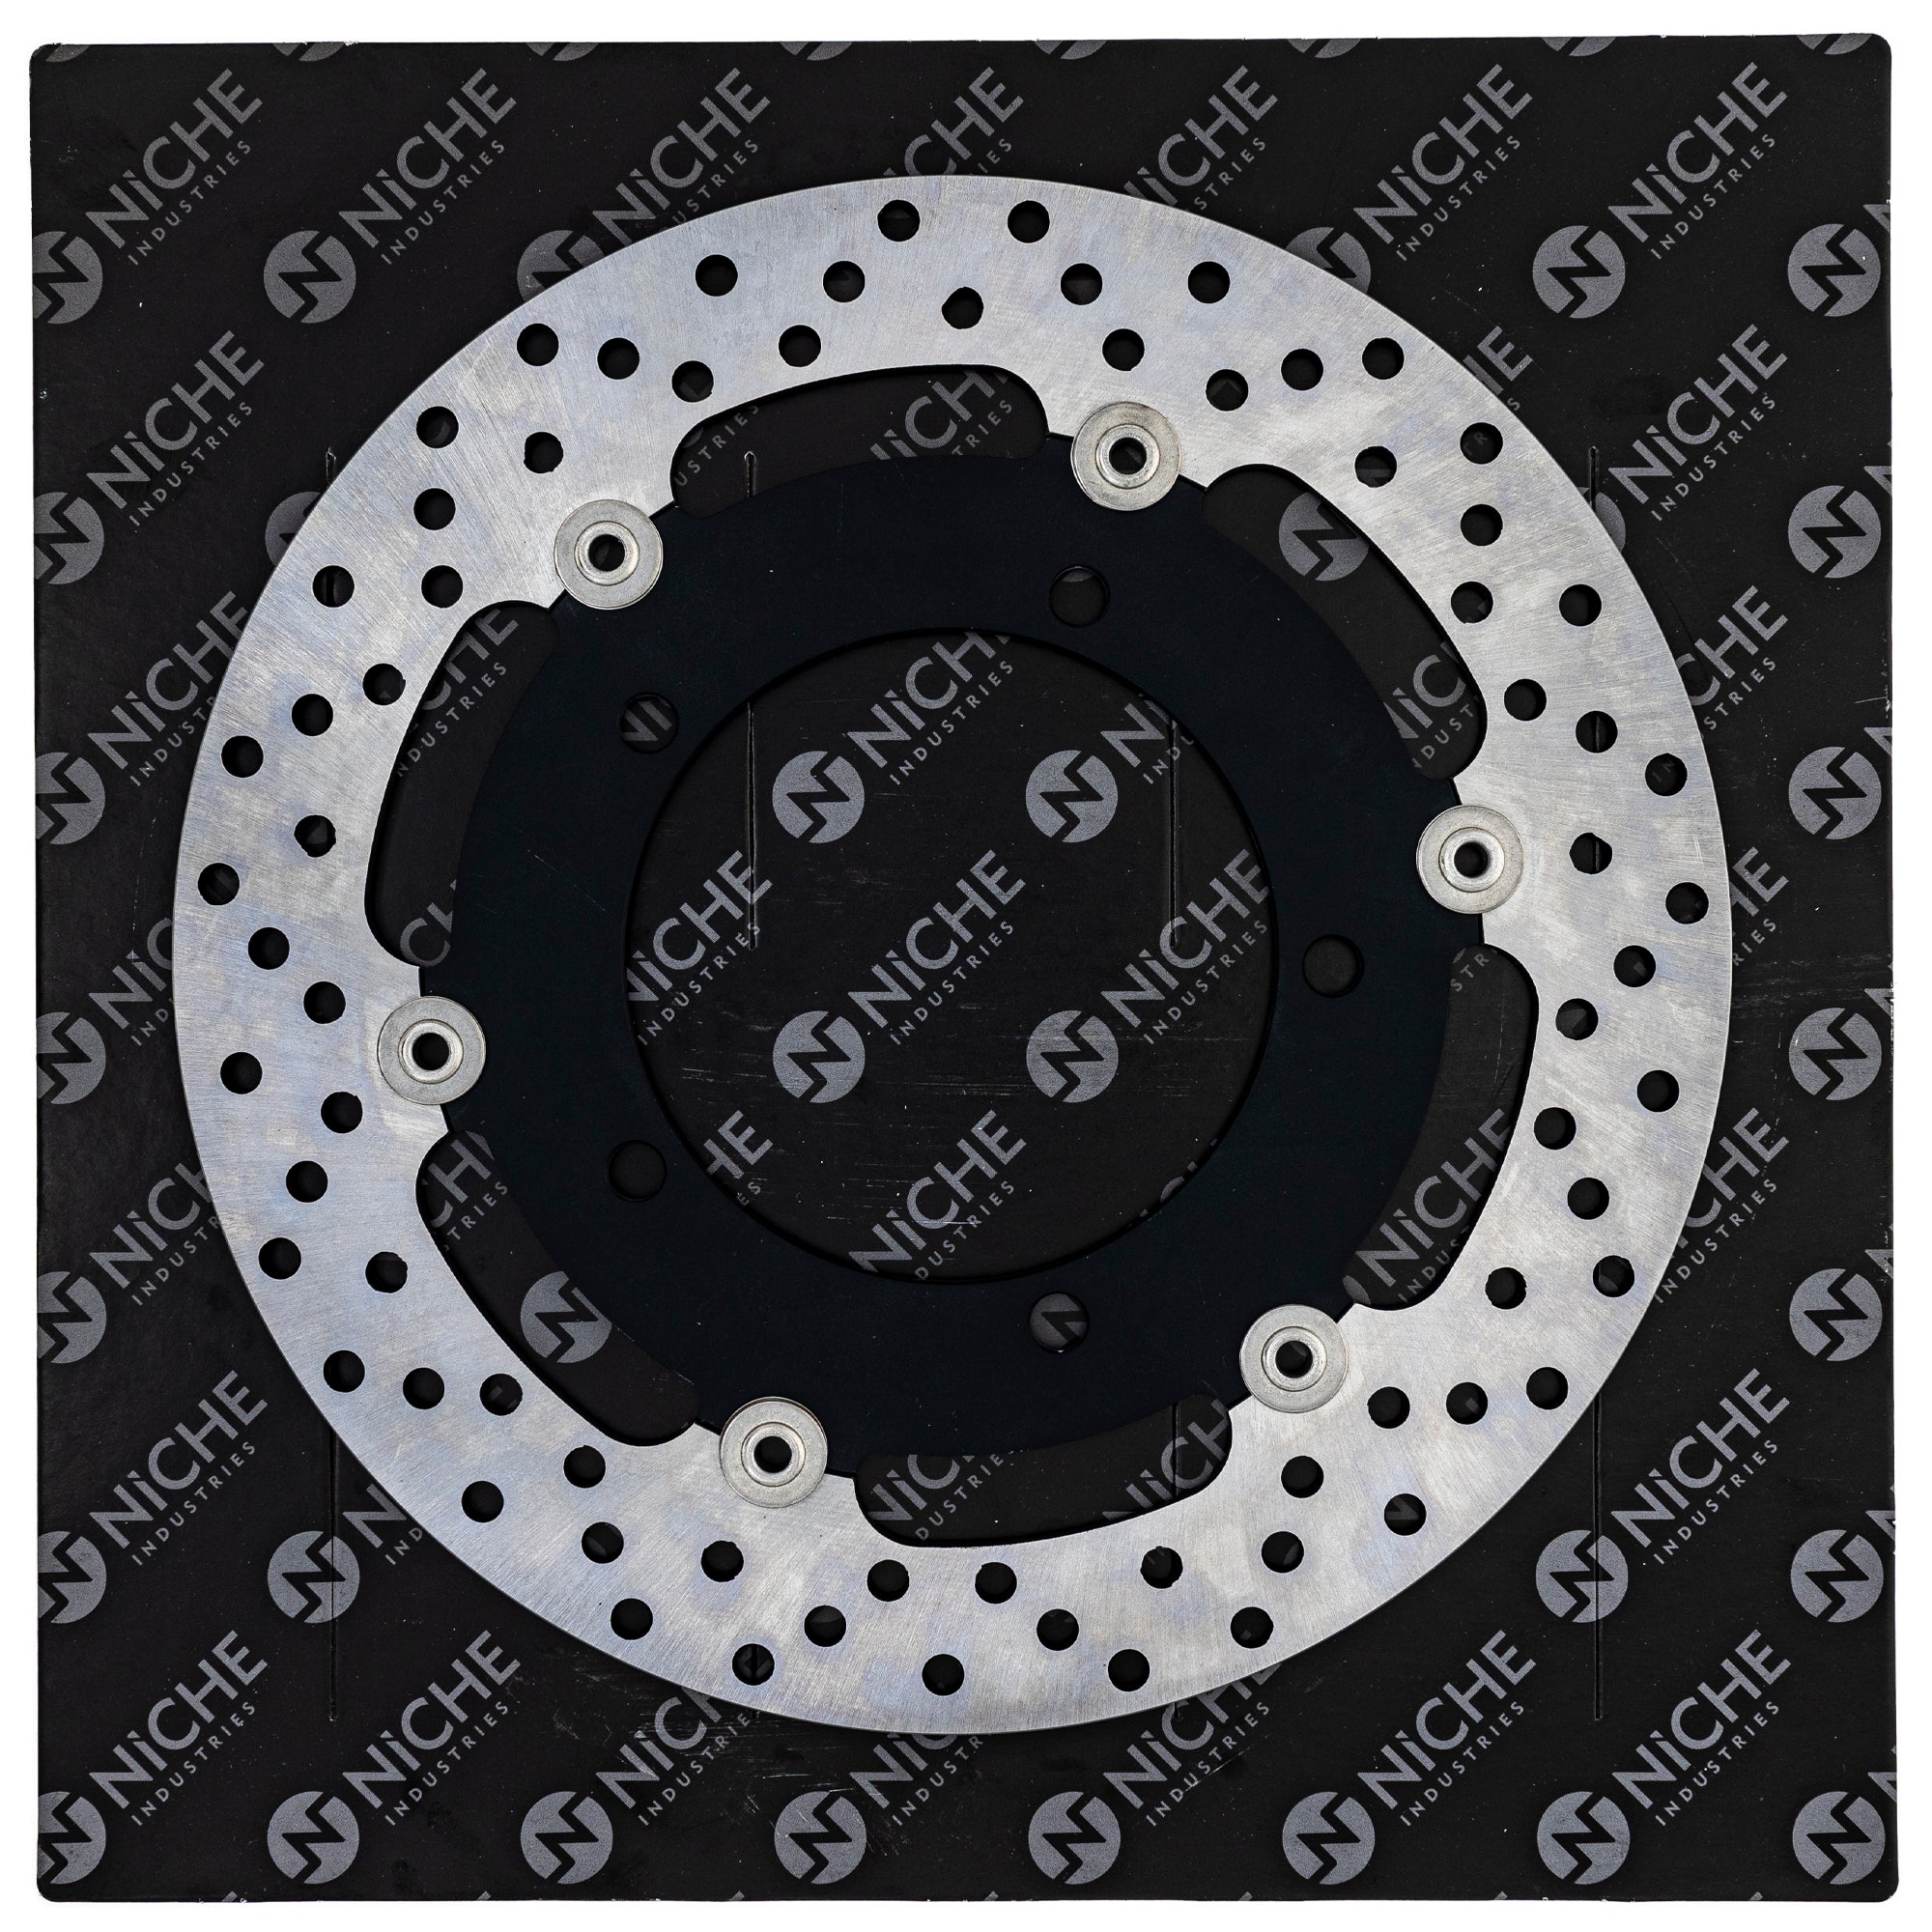 NICHE 519-CRT2474R Front Brake Rotor for zOTHER SV650SF SV650S SV650A